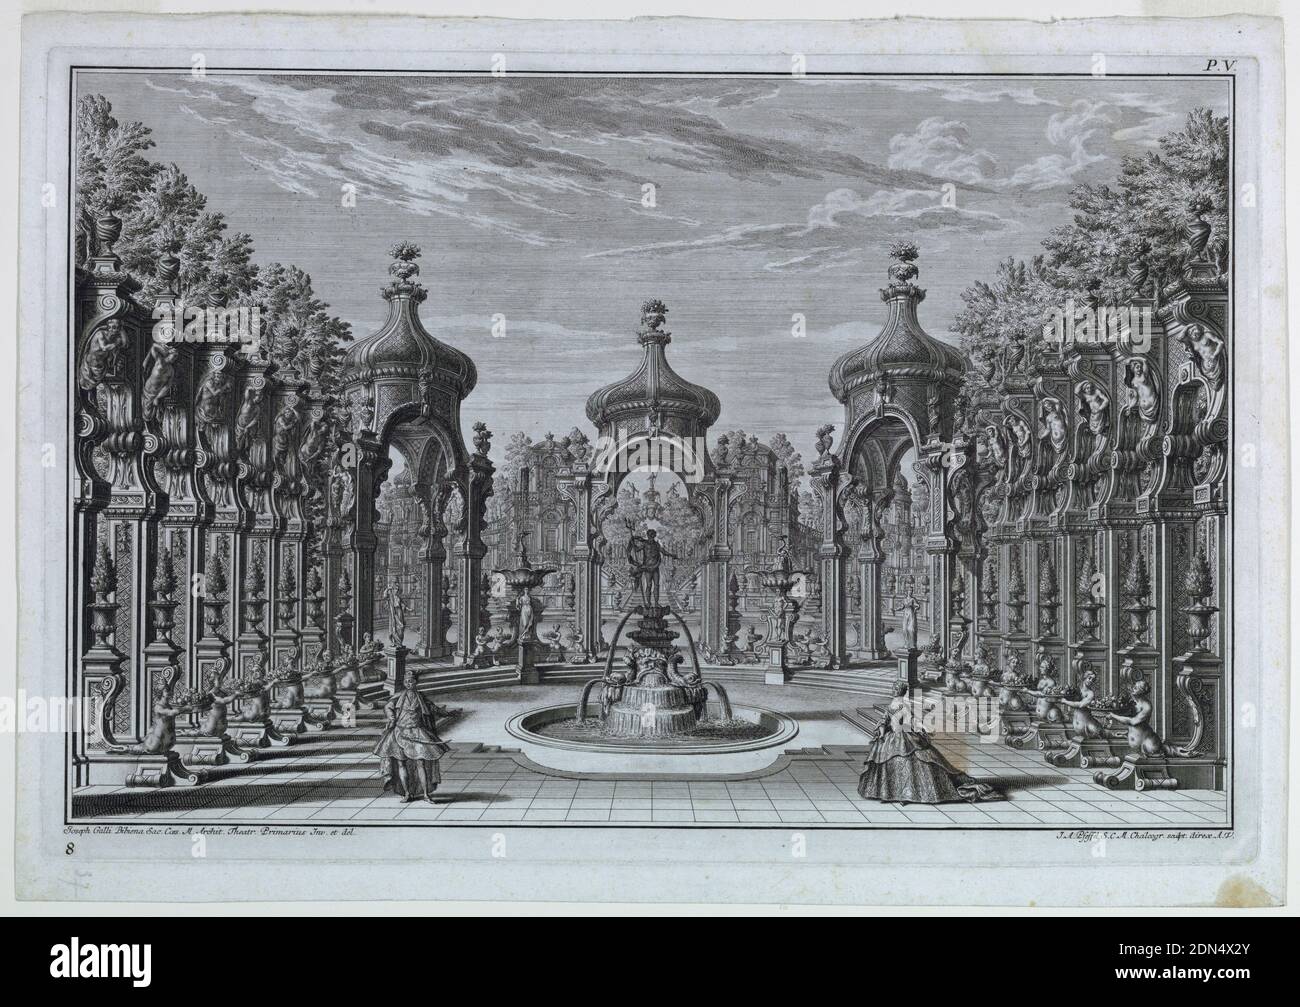 Stage Design: Garden Scene with a Fountain, Part V, Plate 8, 'Architettura e Prospettive,' Augsburg, Giuseppe Galli Bibiena, Italian, 1696–1756, Johann Andréas Pfeffel, German, 1674–1748, Etching with engraving in black ink on white paper, Horizontal rectangle. Two figures in a garden scene with a fountaion surmounted by a statue of Neptune in the center of the stage, and three onion-domed arches behind, with landscape and architecture beyond., Italy, 1740–44, theater, Print Stock Photo